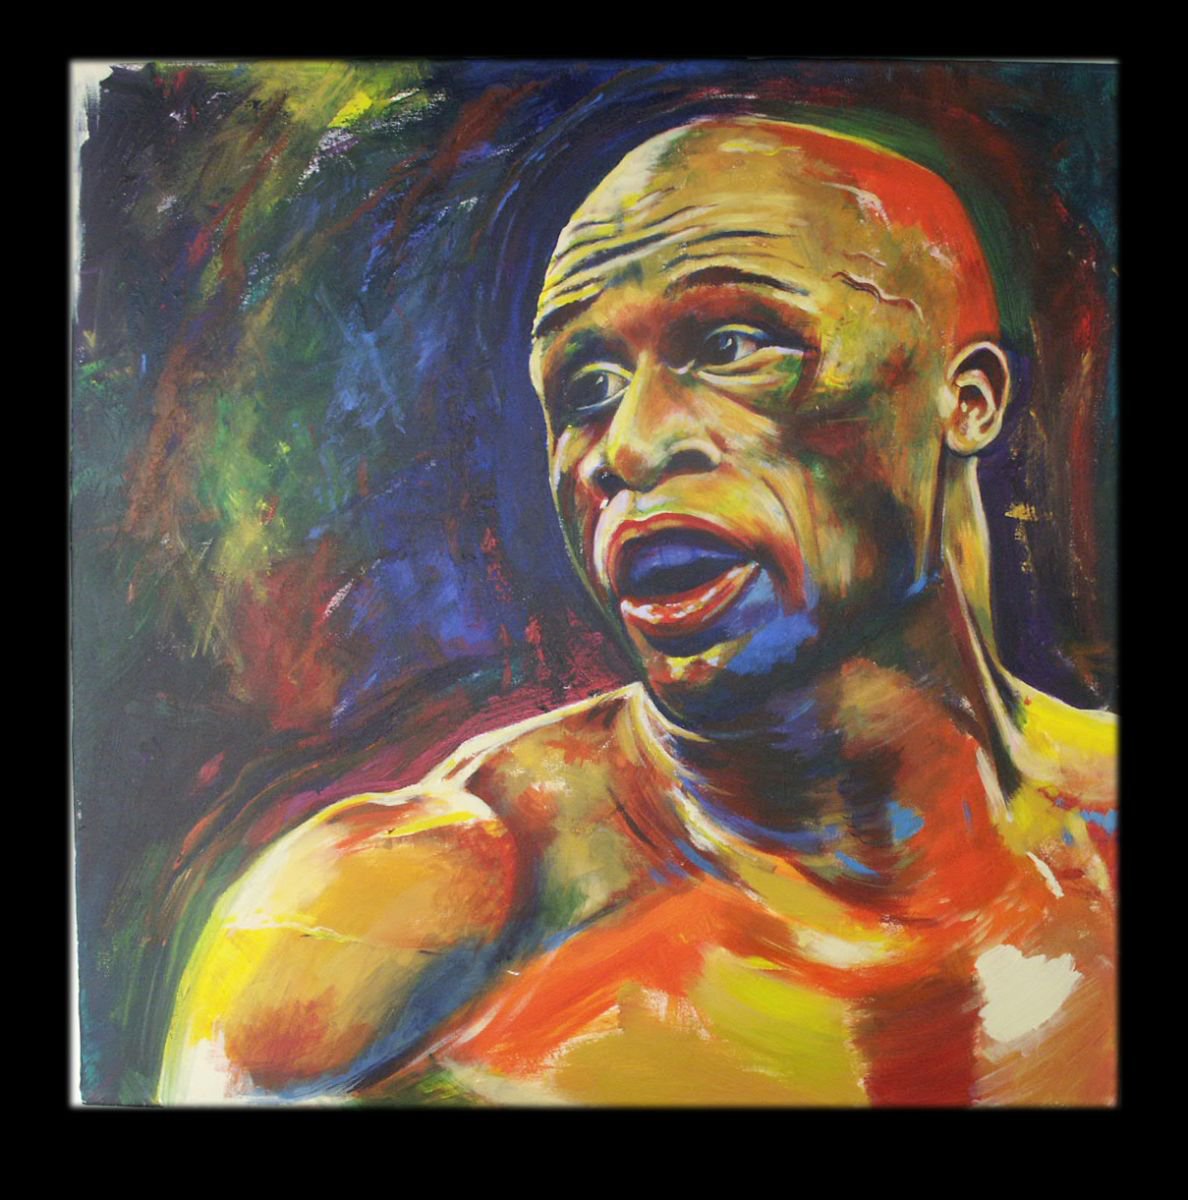 Reflection for the boxer by Mark Purllant